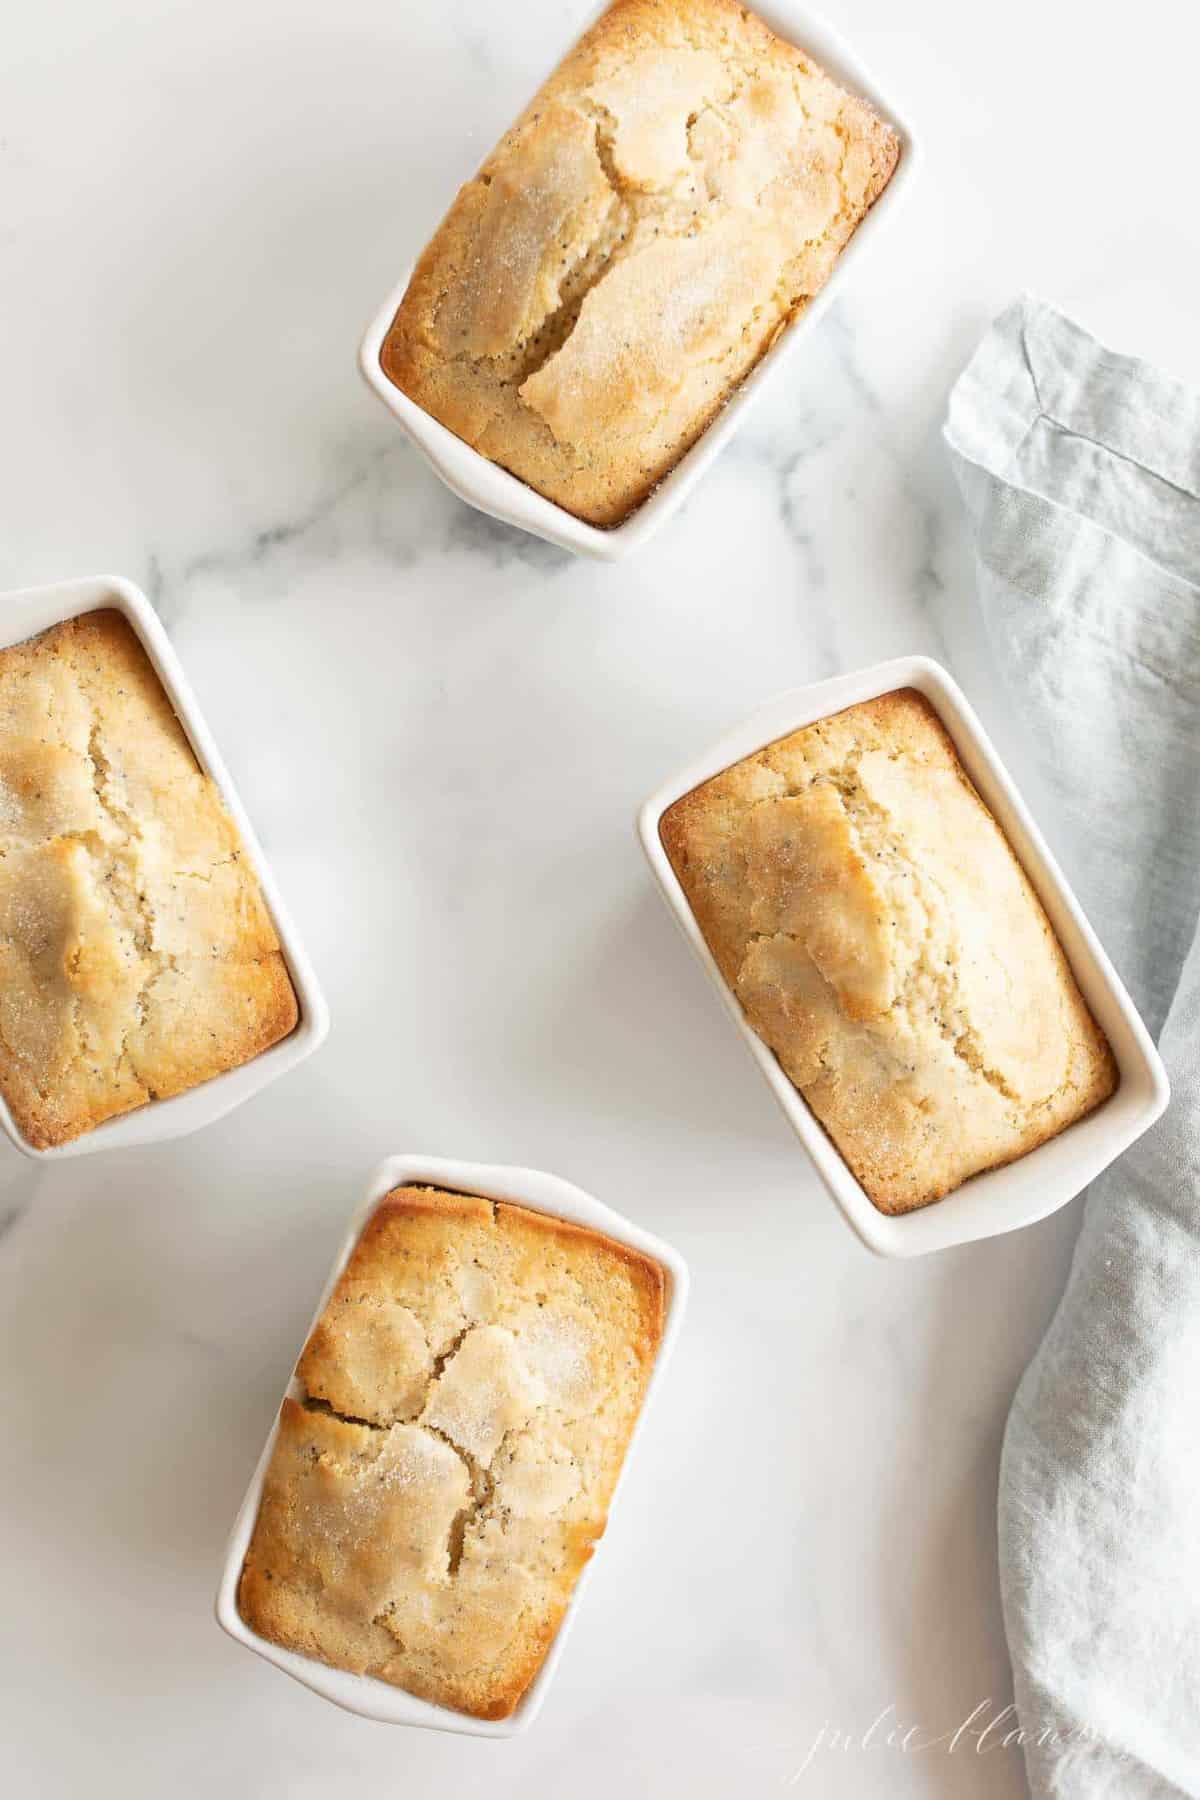 A poppy seed bread recipe made into several small white loaf pans on a marble surface.